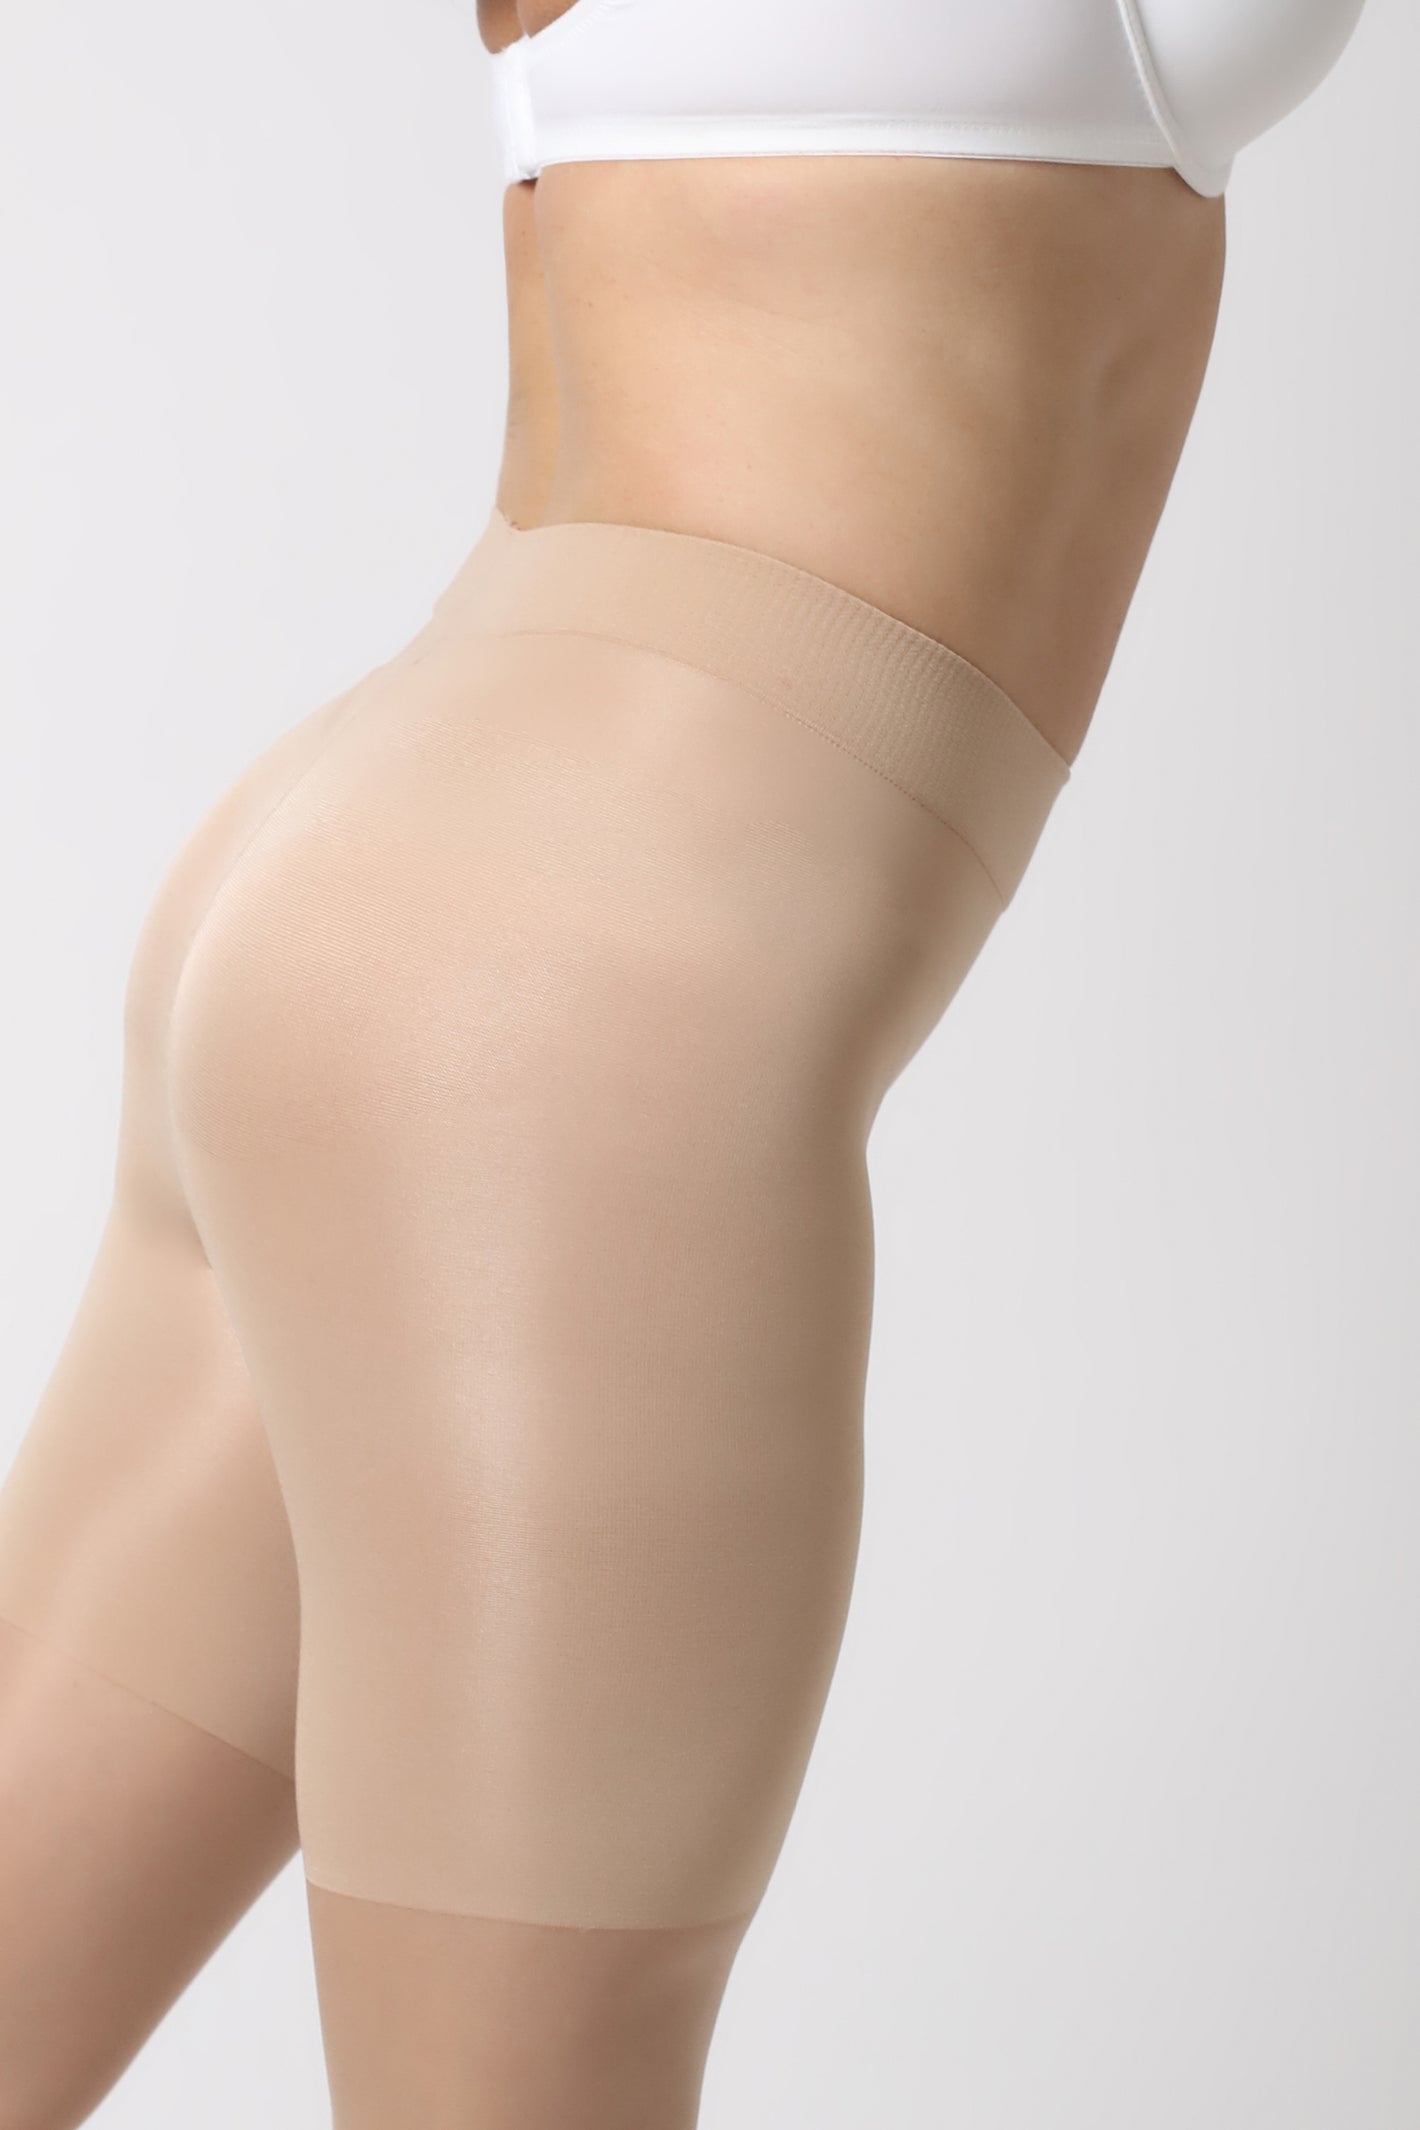 top part of shapewear tights - Nude